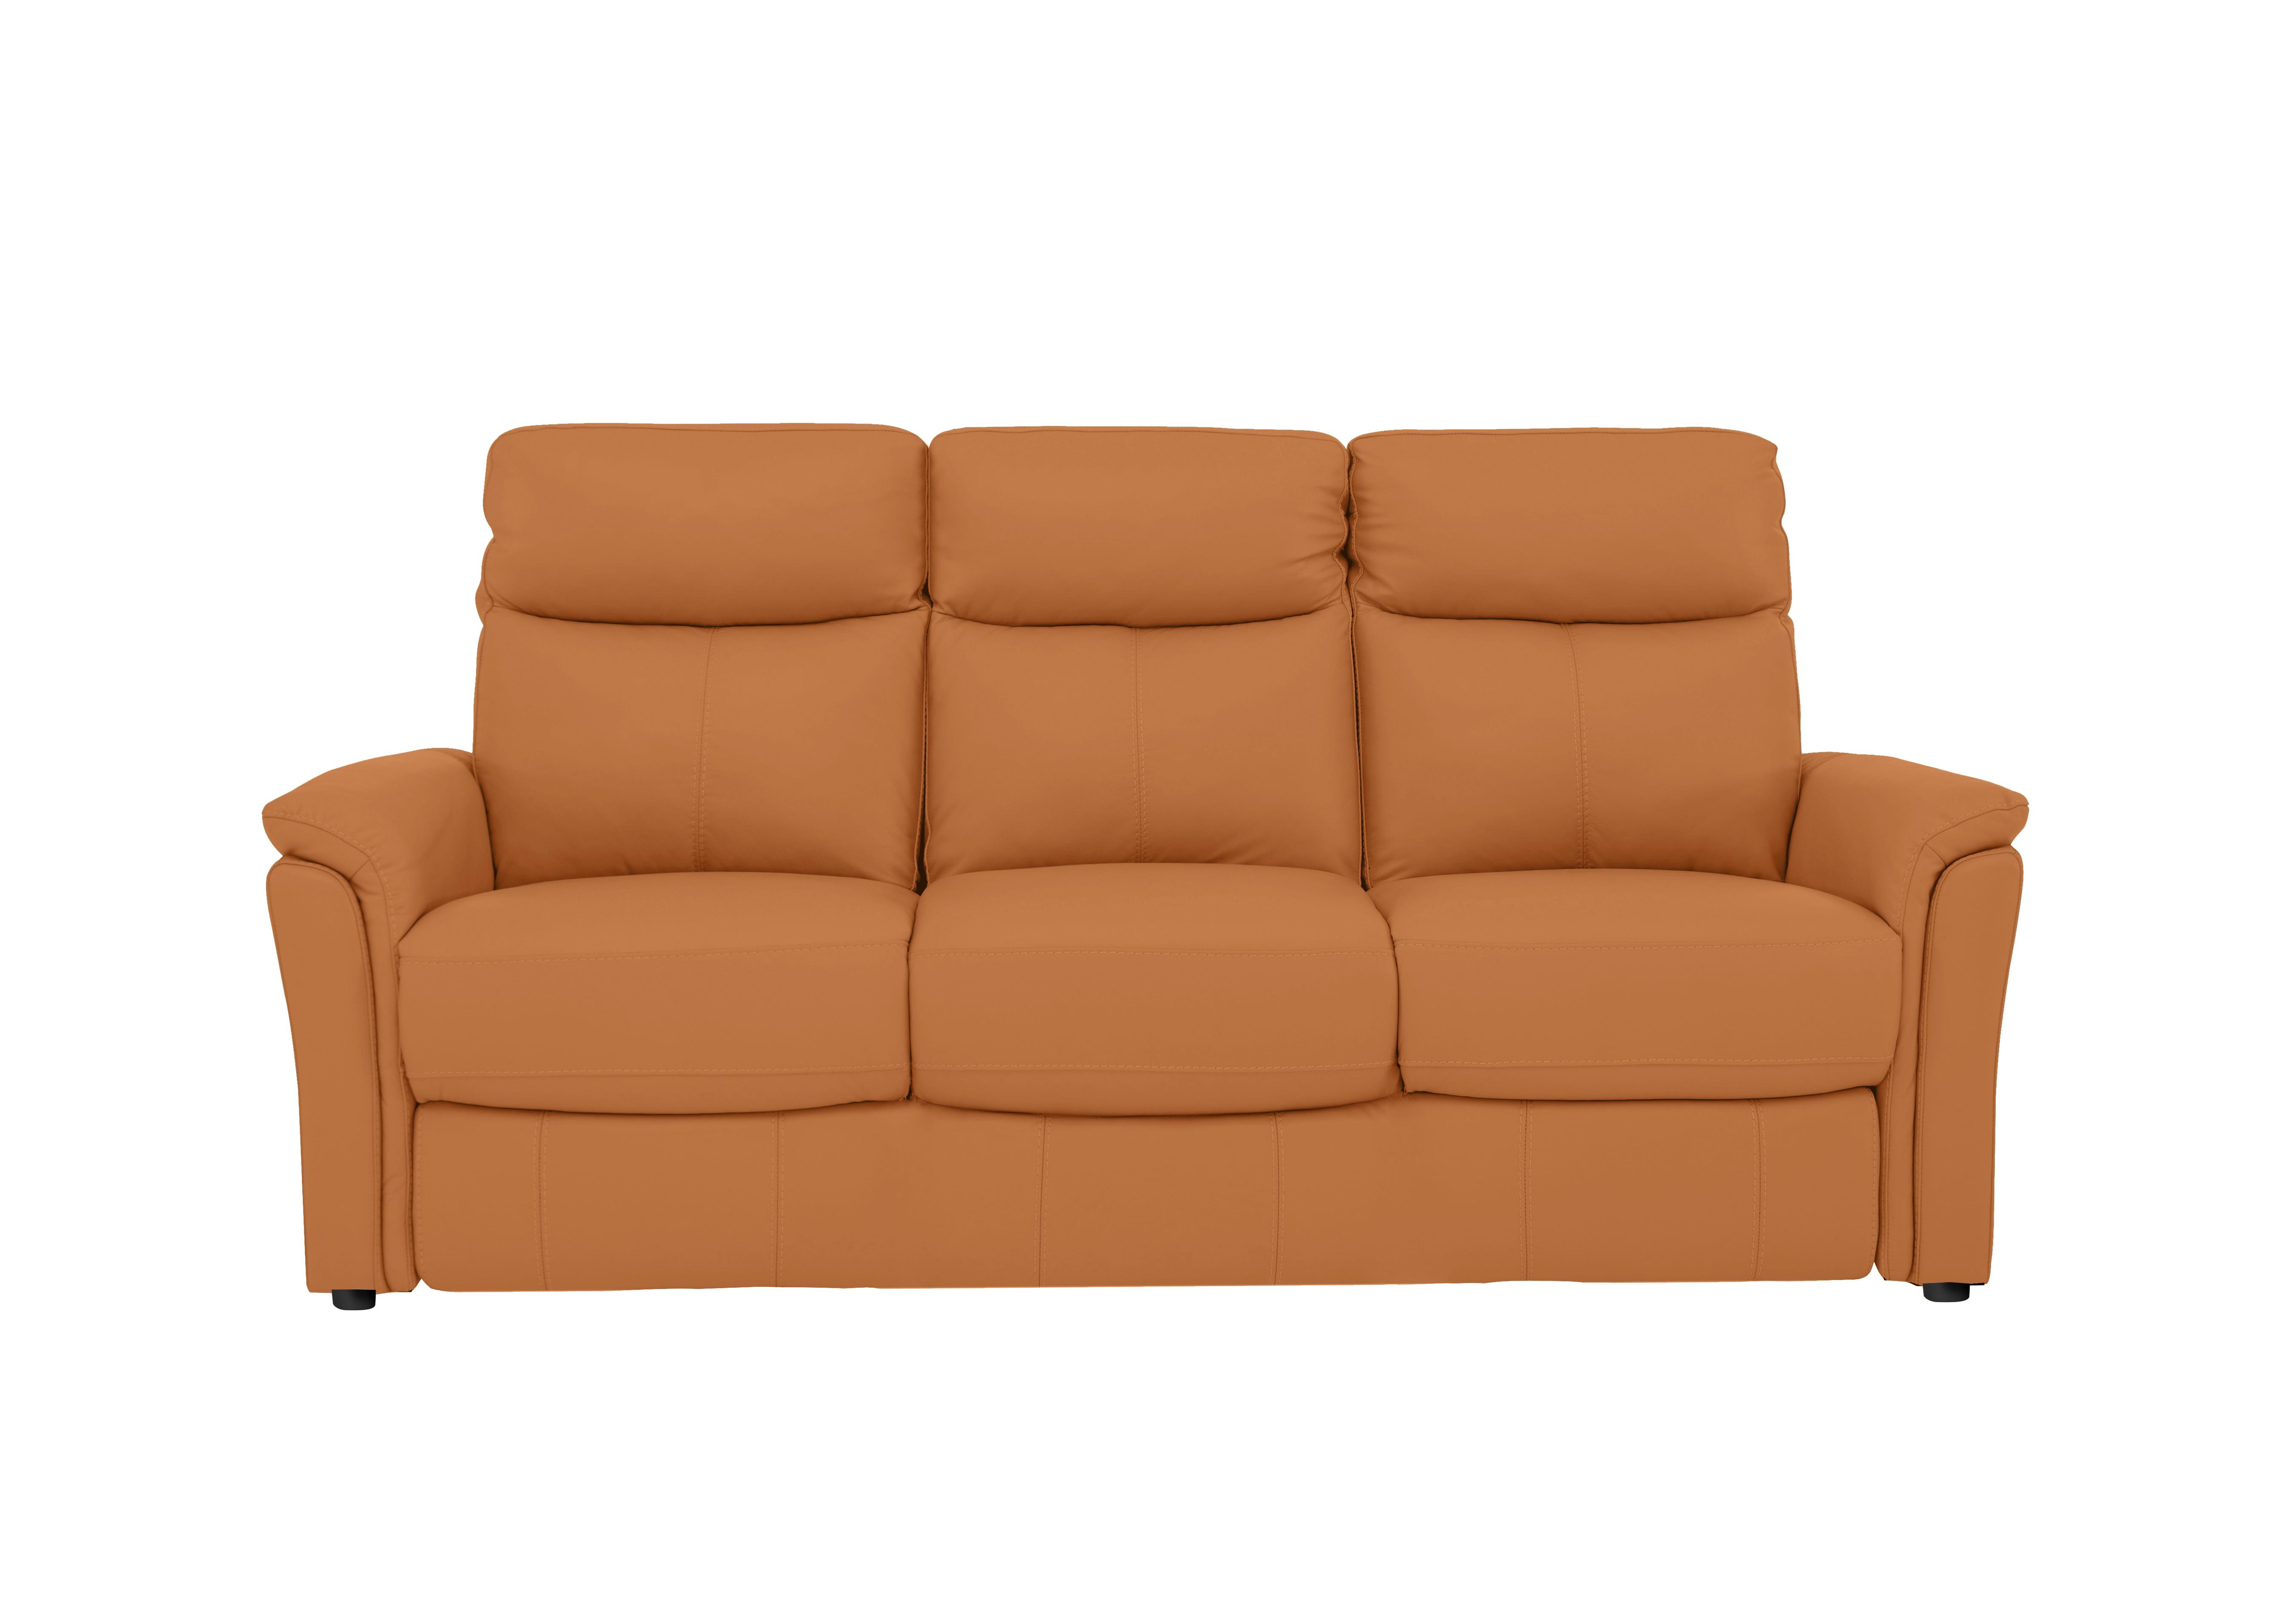 Compact Collection Piccolo 3 Seater Leather Static Sofa in Bv-335e Honey Yellow on Furniture Village